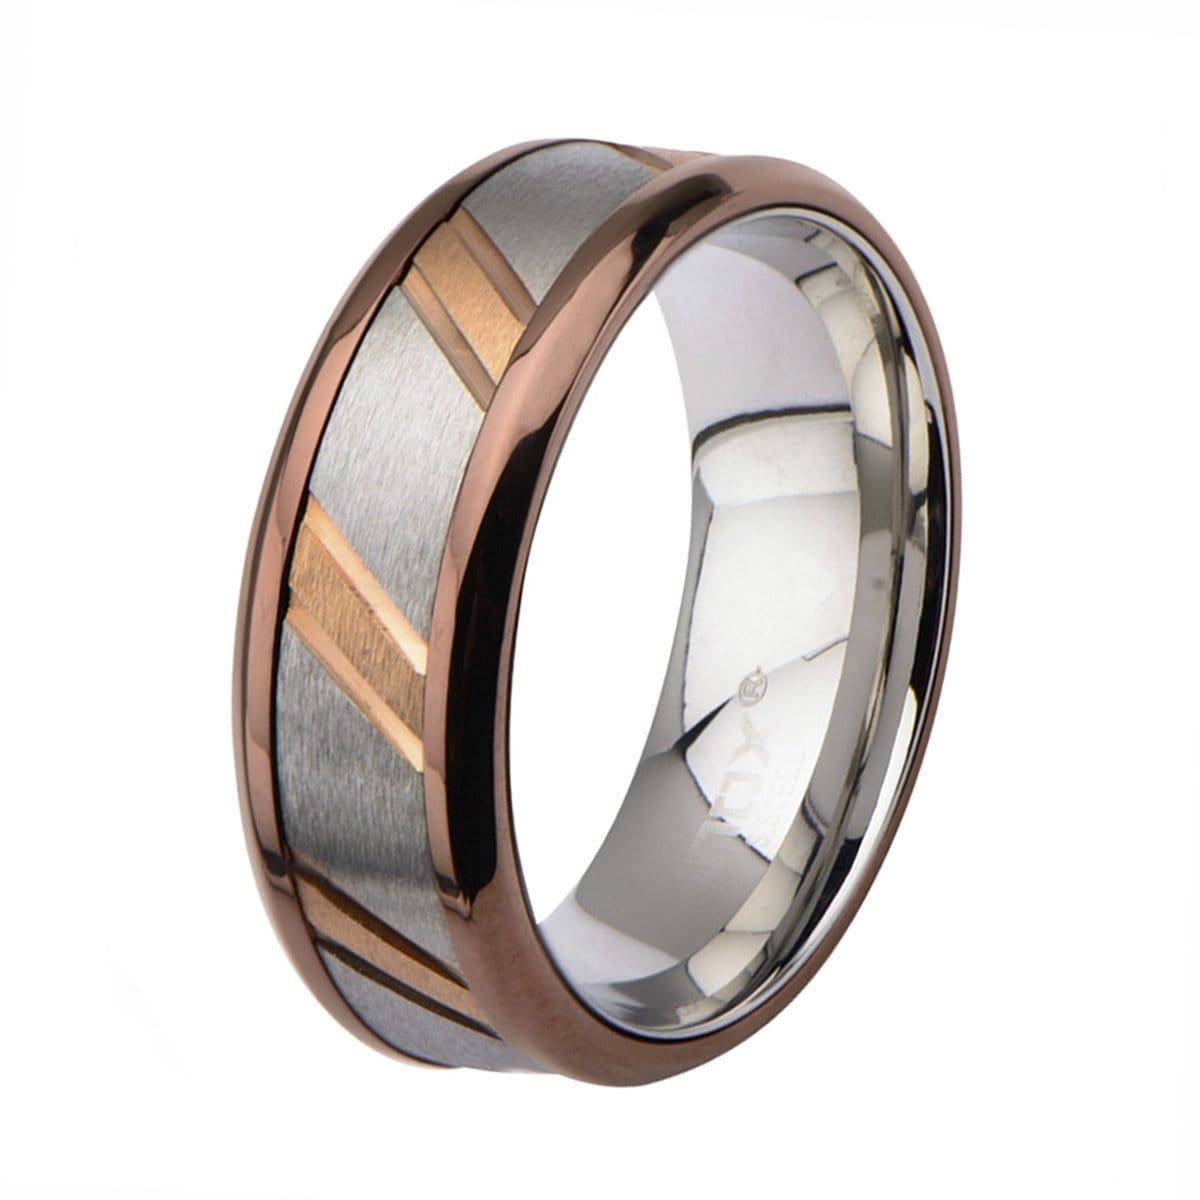 INOX JEWELRY Rings Rose Tone, Brown and Silver Tone Stainless Steel Diagonal Slash Ring